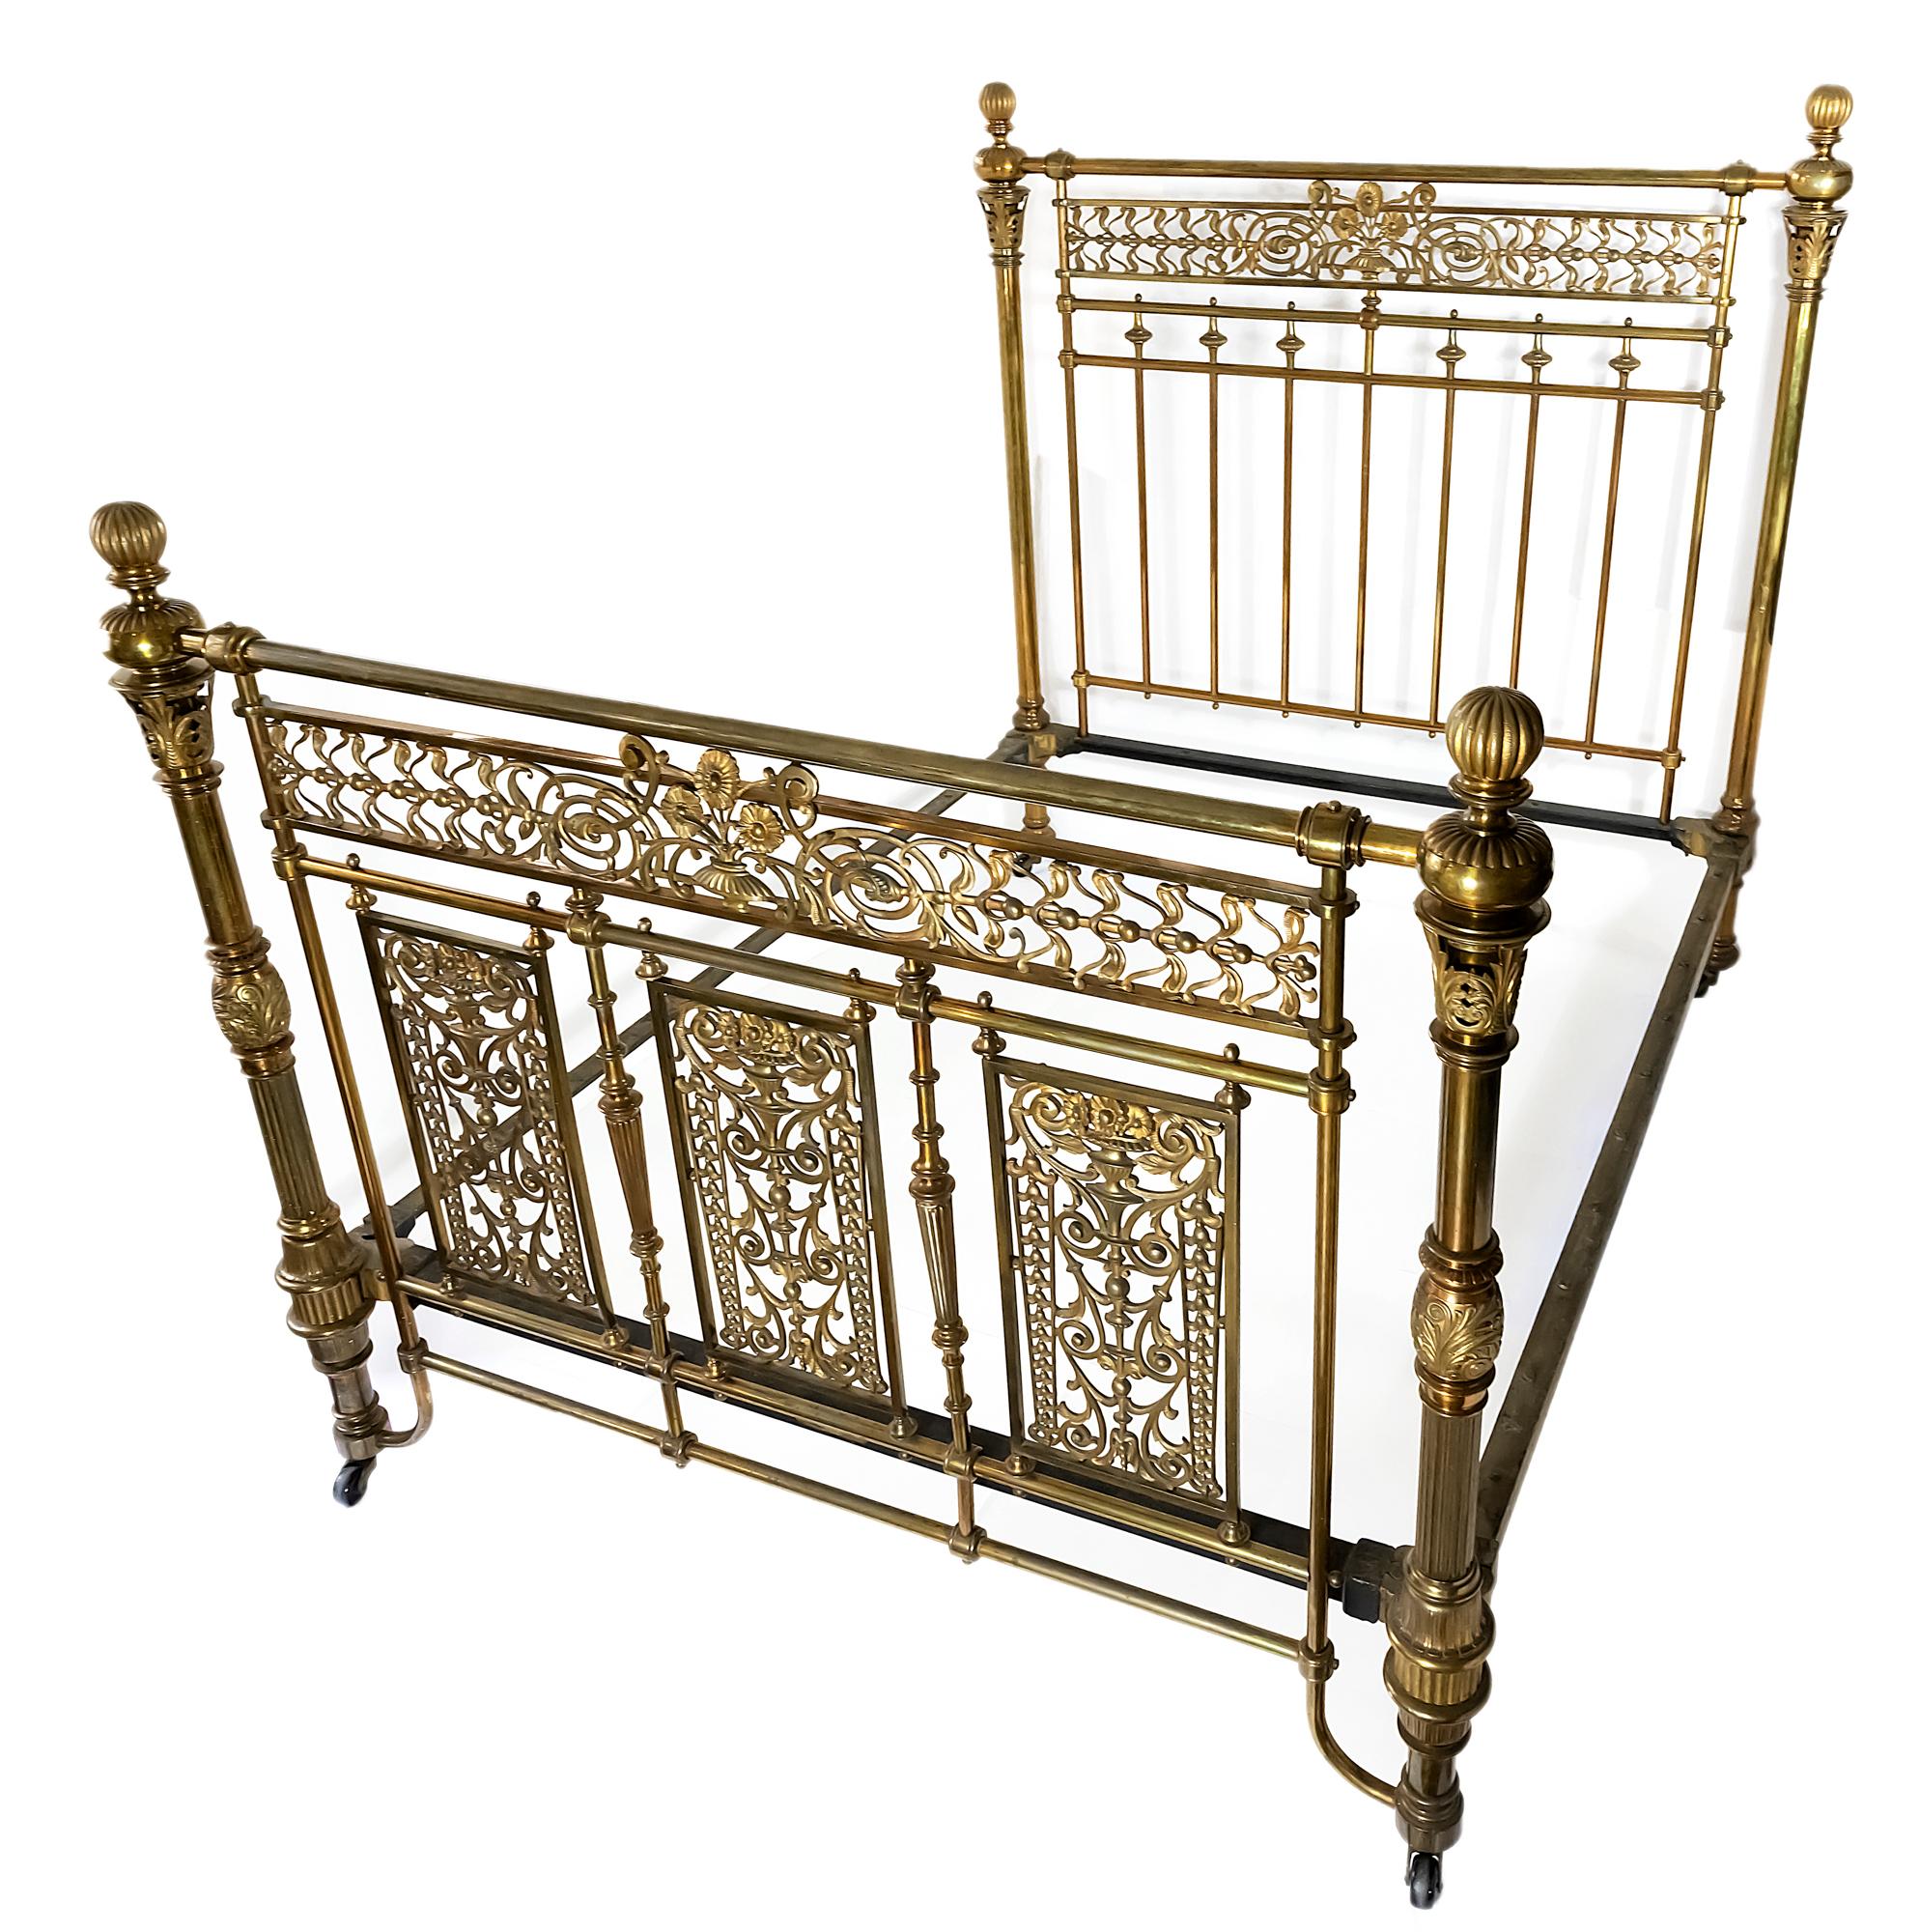 Antique English bronze double bed/frame, circa 1880, produced and signed by Winfields Limited.
The main construction is in iron.
The construction is decorated with solid bronze details and floral ornaments in Art Nouveau style.
The bed legs are